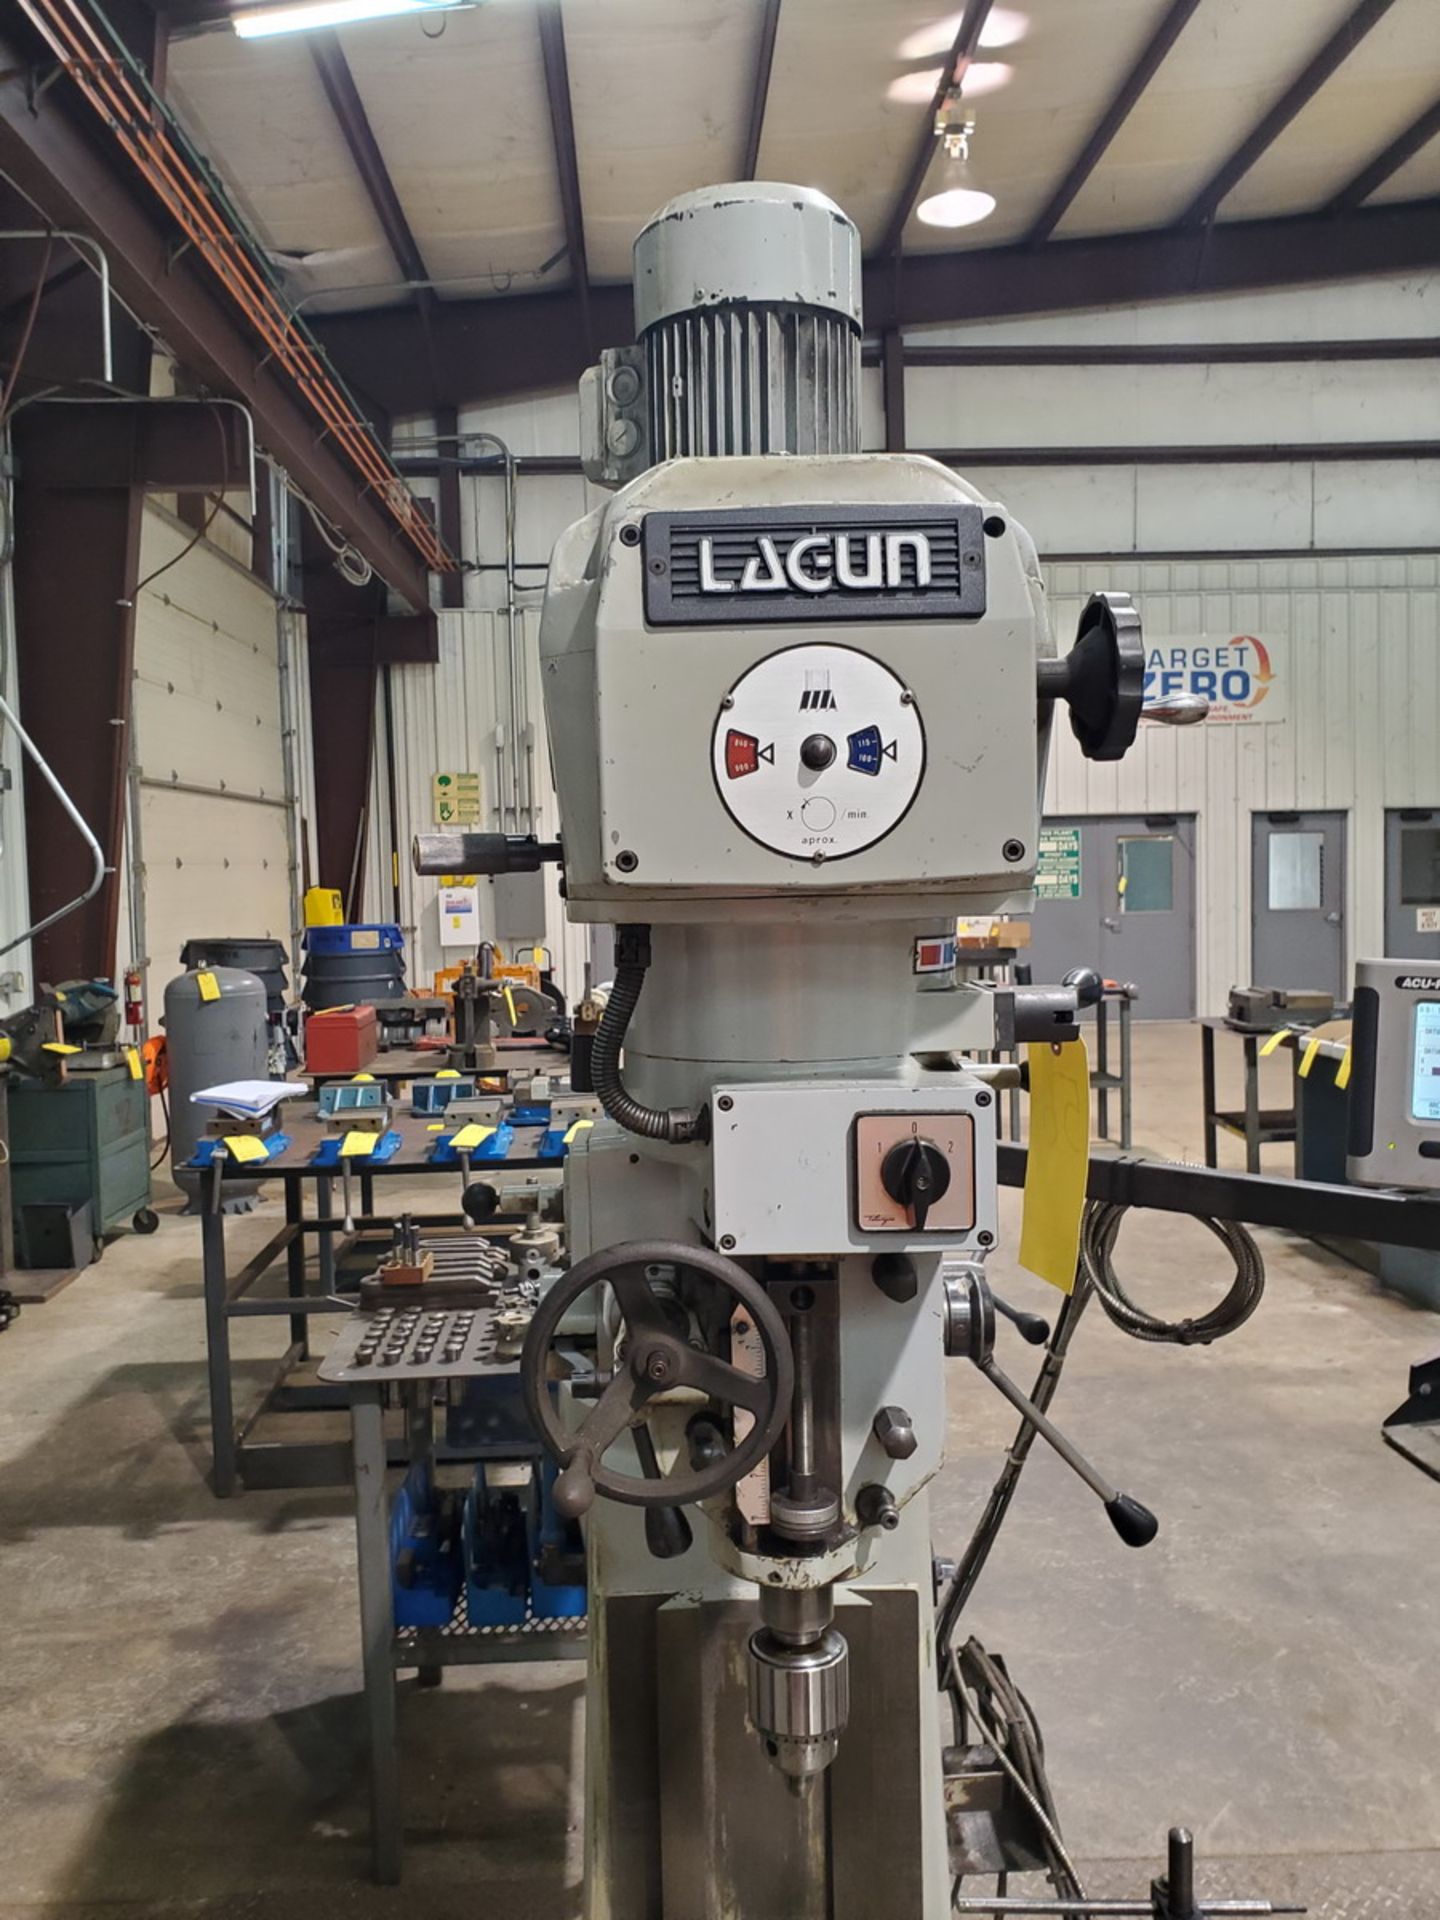 Lagun FTV 2 Turret Milling Machine W/ Acu-Rite Controller; 50" x 10" Slotted Table - Image 7 of 14